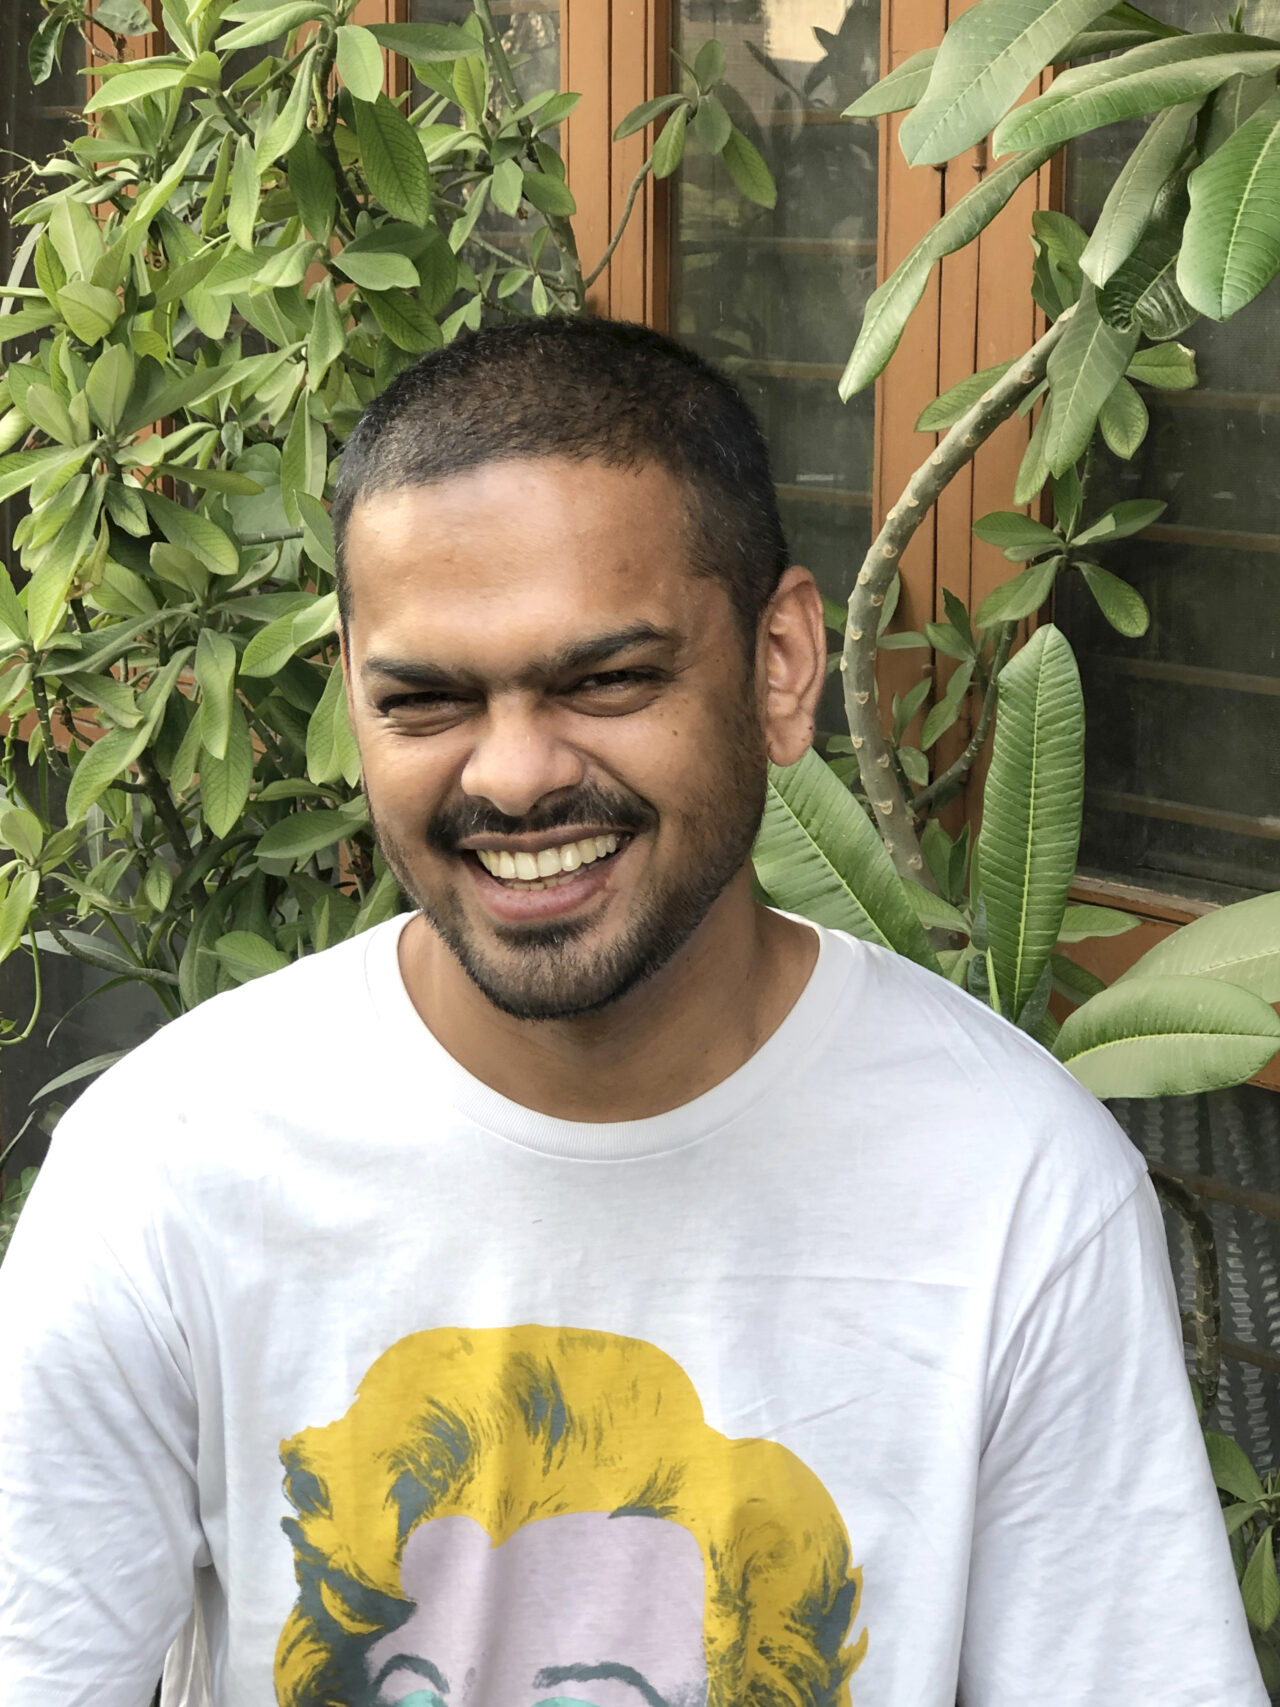 Pictured is Parabartana Mohanty, a lighter skin Indian man, with buzzed hair, and a trimmed mustache and beard. He wears a white t-shirt with a print of one of Andy Warhol's Marilyn Monroe Diptychs. He is smiling with teeth baring, and standing in front a wall of green leaves.